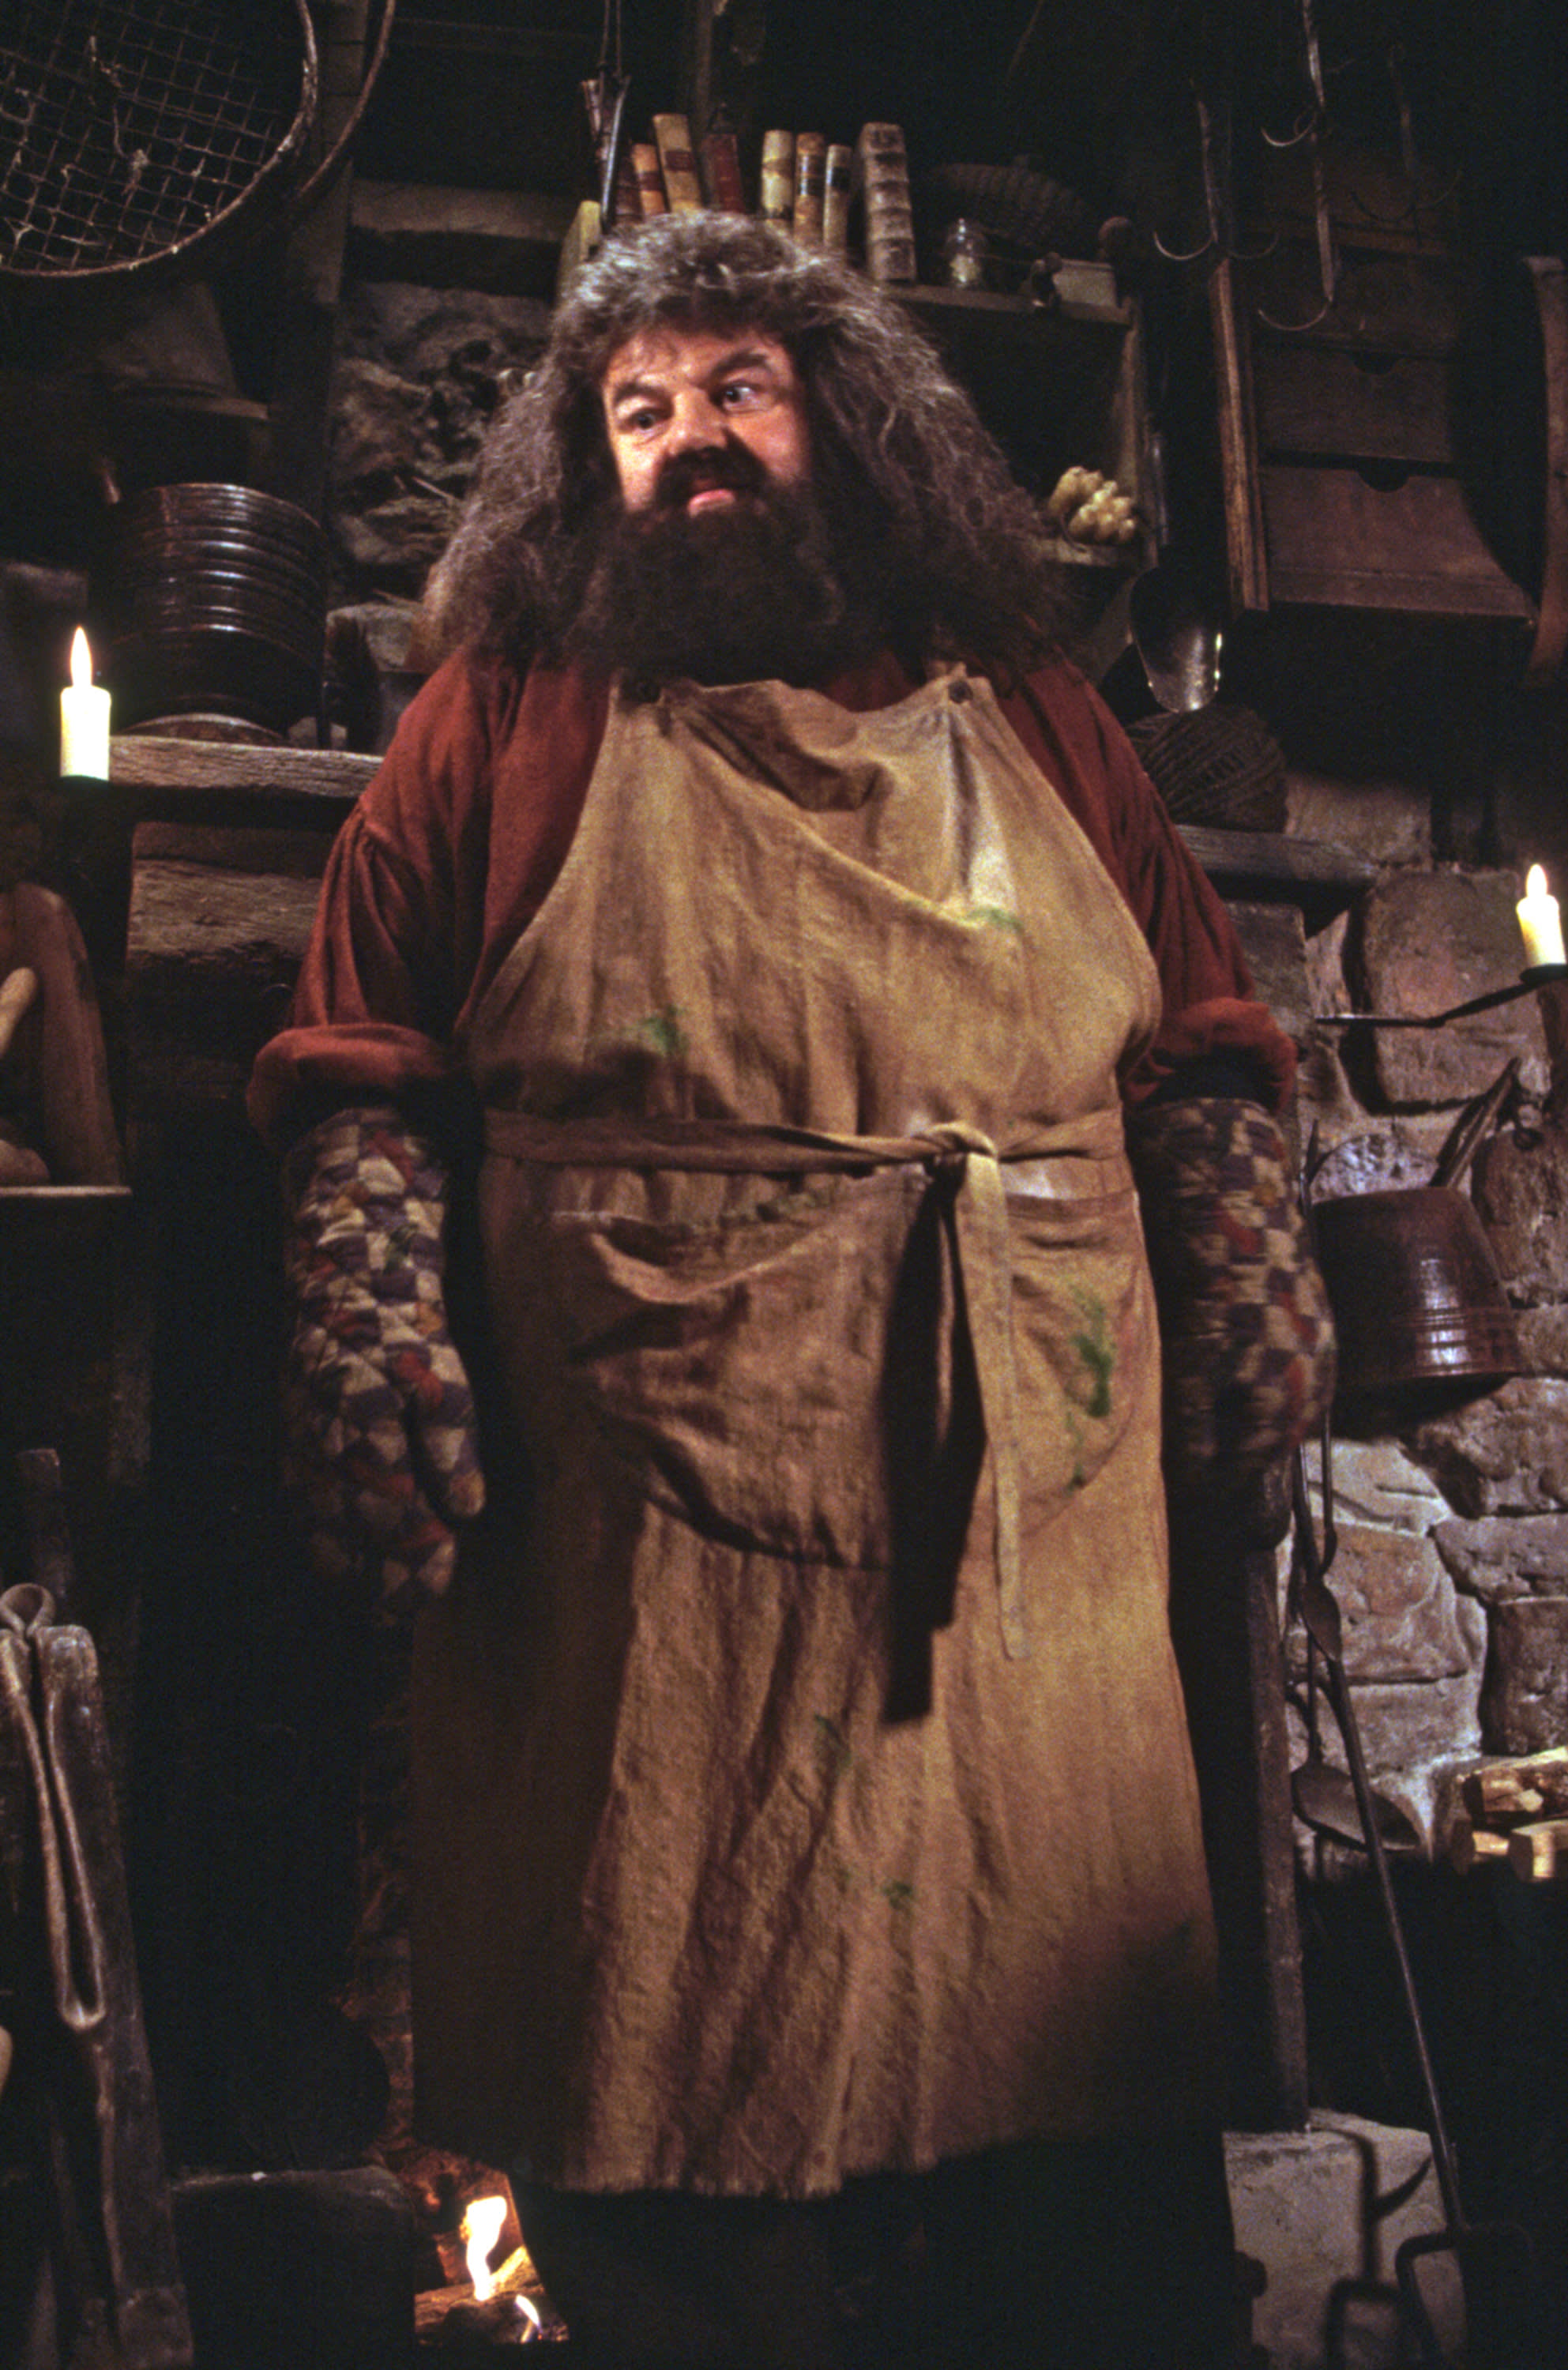 Hagrid in an apron and gloves in his hut from the Philosopher's Stone 